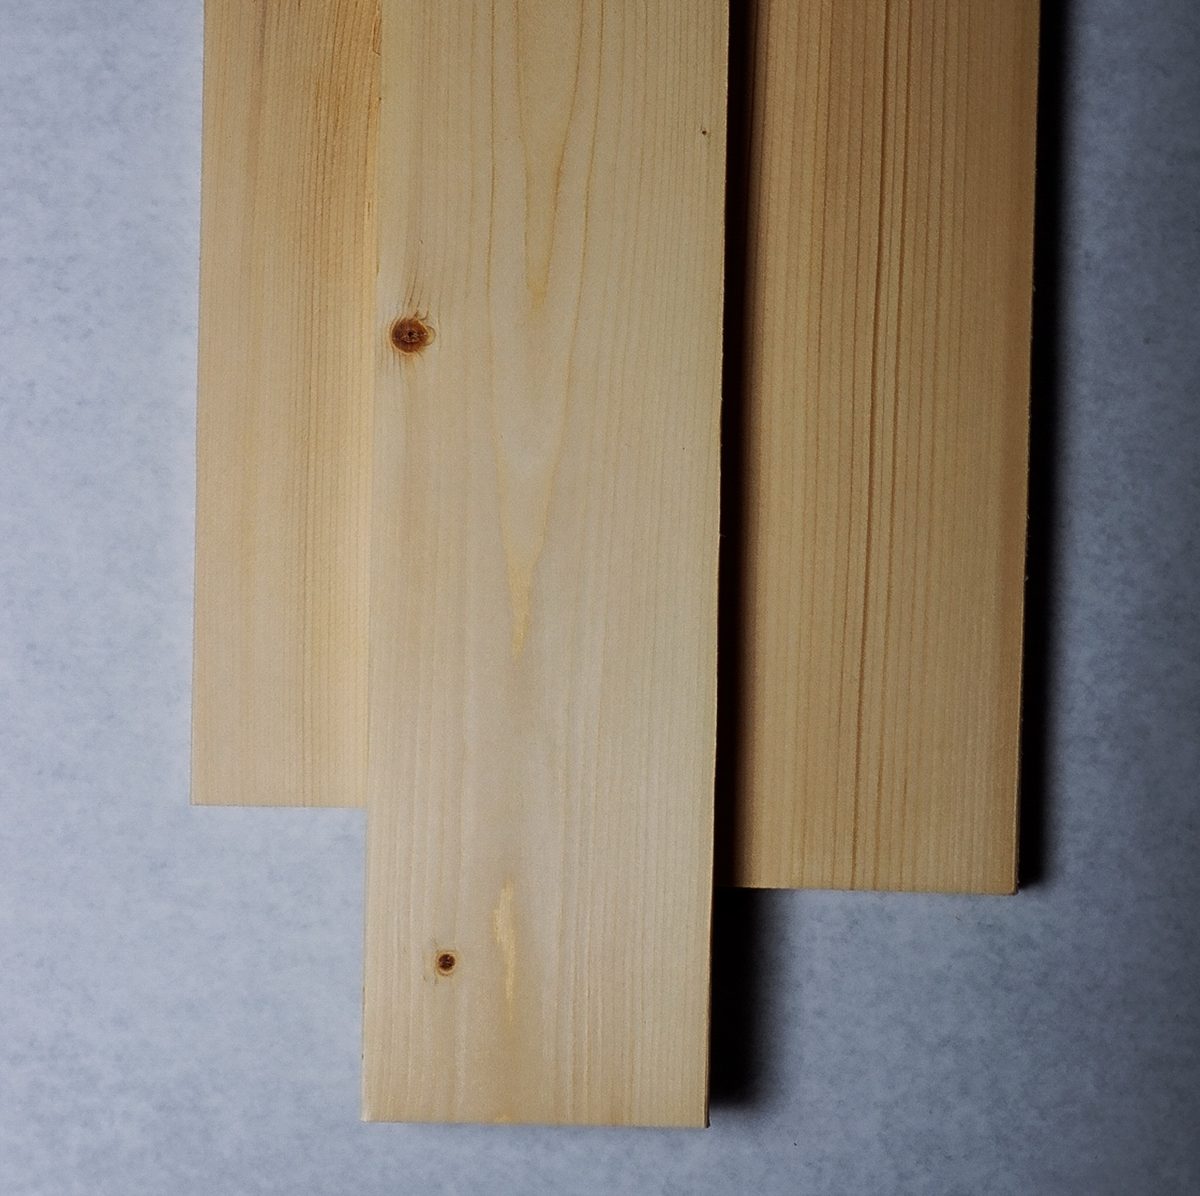 Several smooth finished Subalpine Fir (Abies lasiocarpa) dimensional lumber boards shown as examples